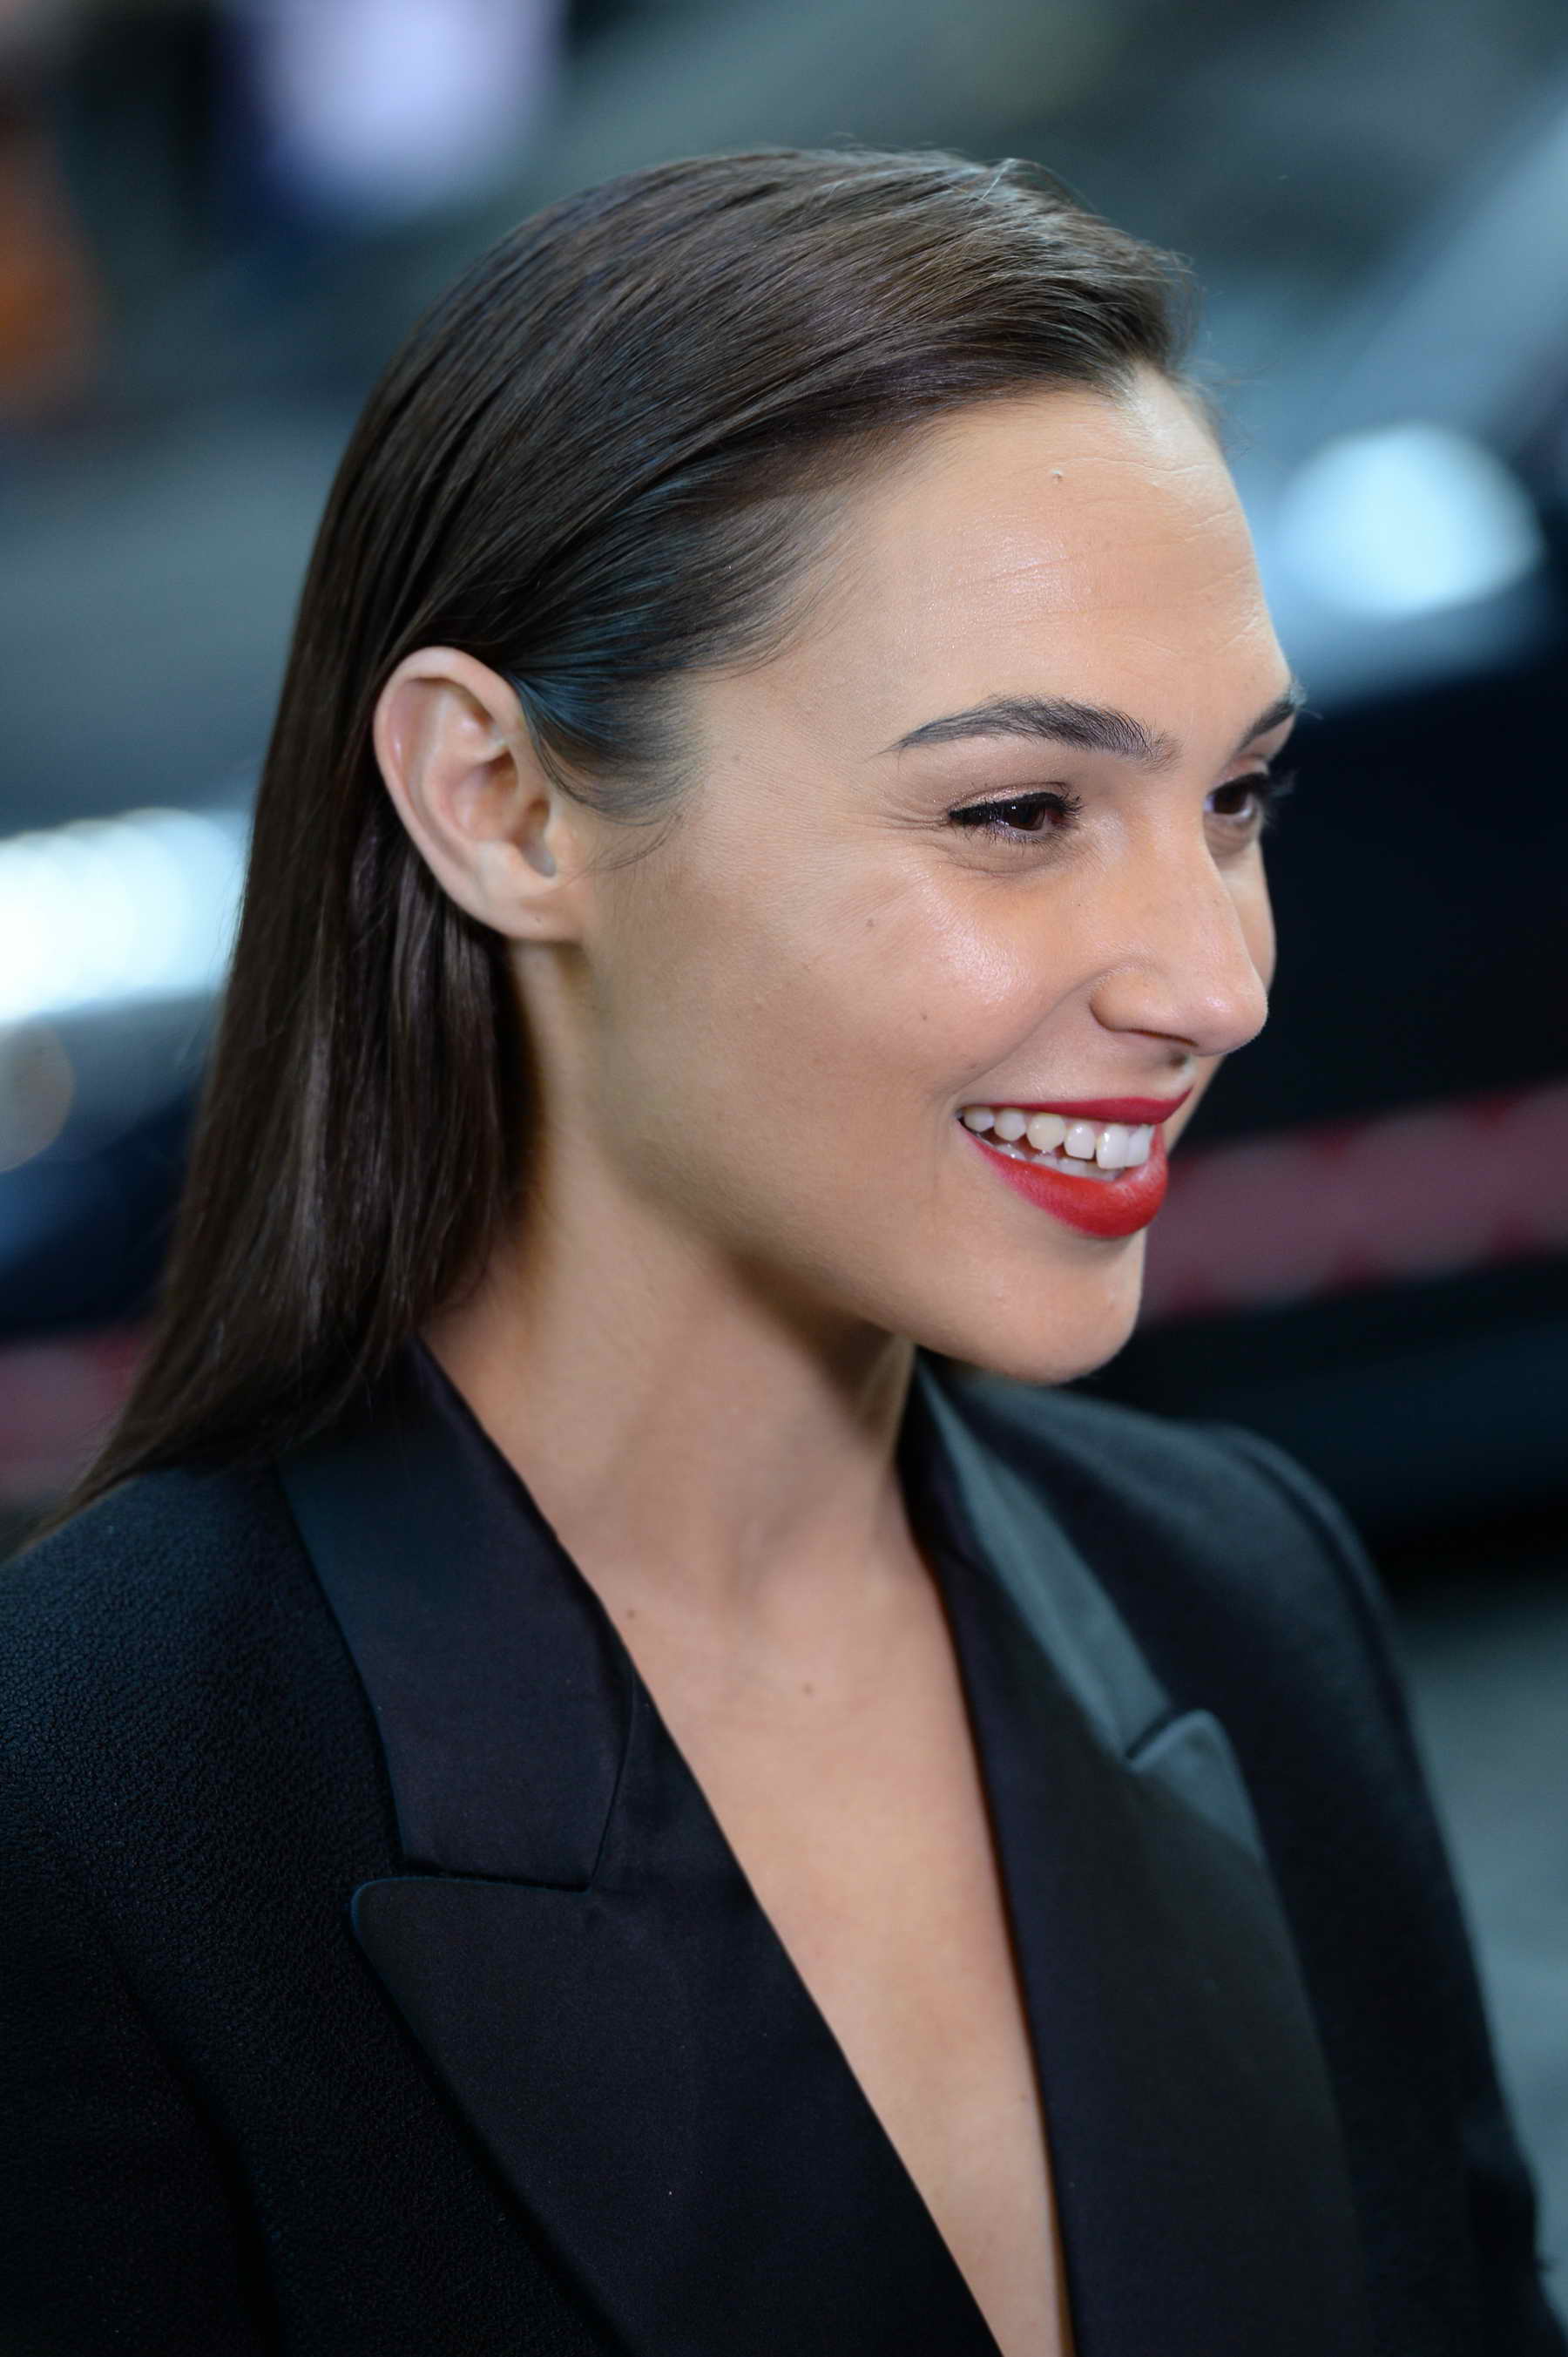 Gal Gadot At The Criminal Premiere In London Celeb Donut Tropes & trivia that apply to her works: gal gadot at the criminal premiere in